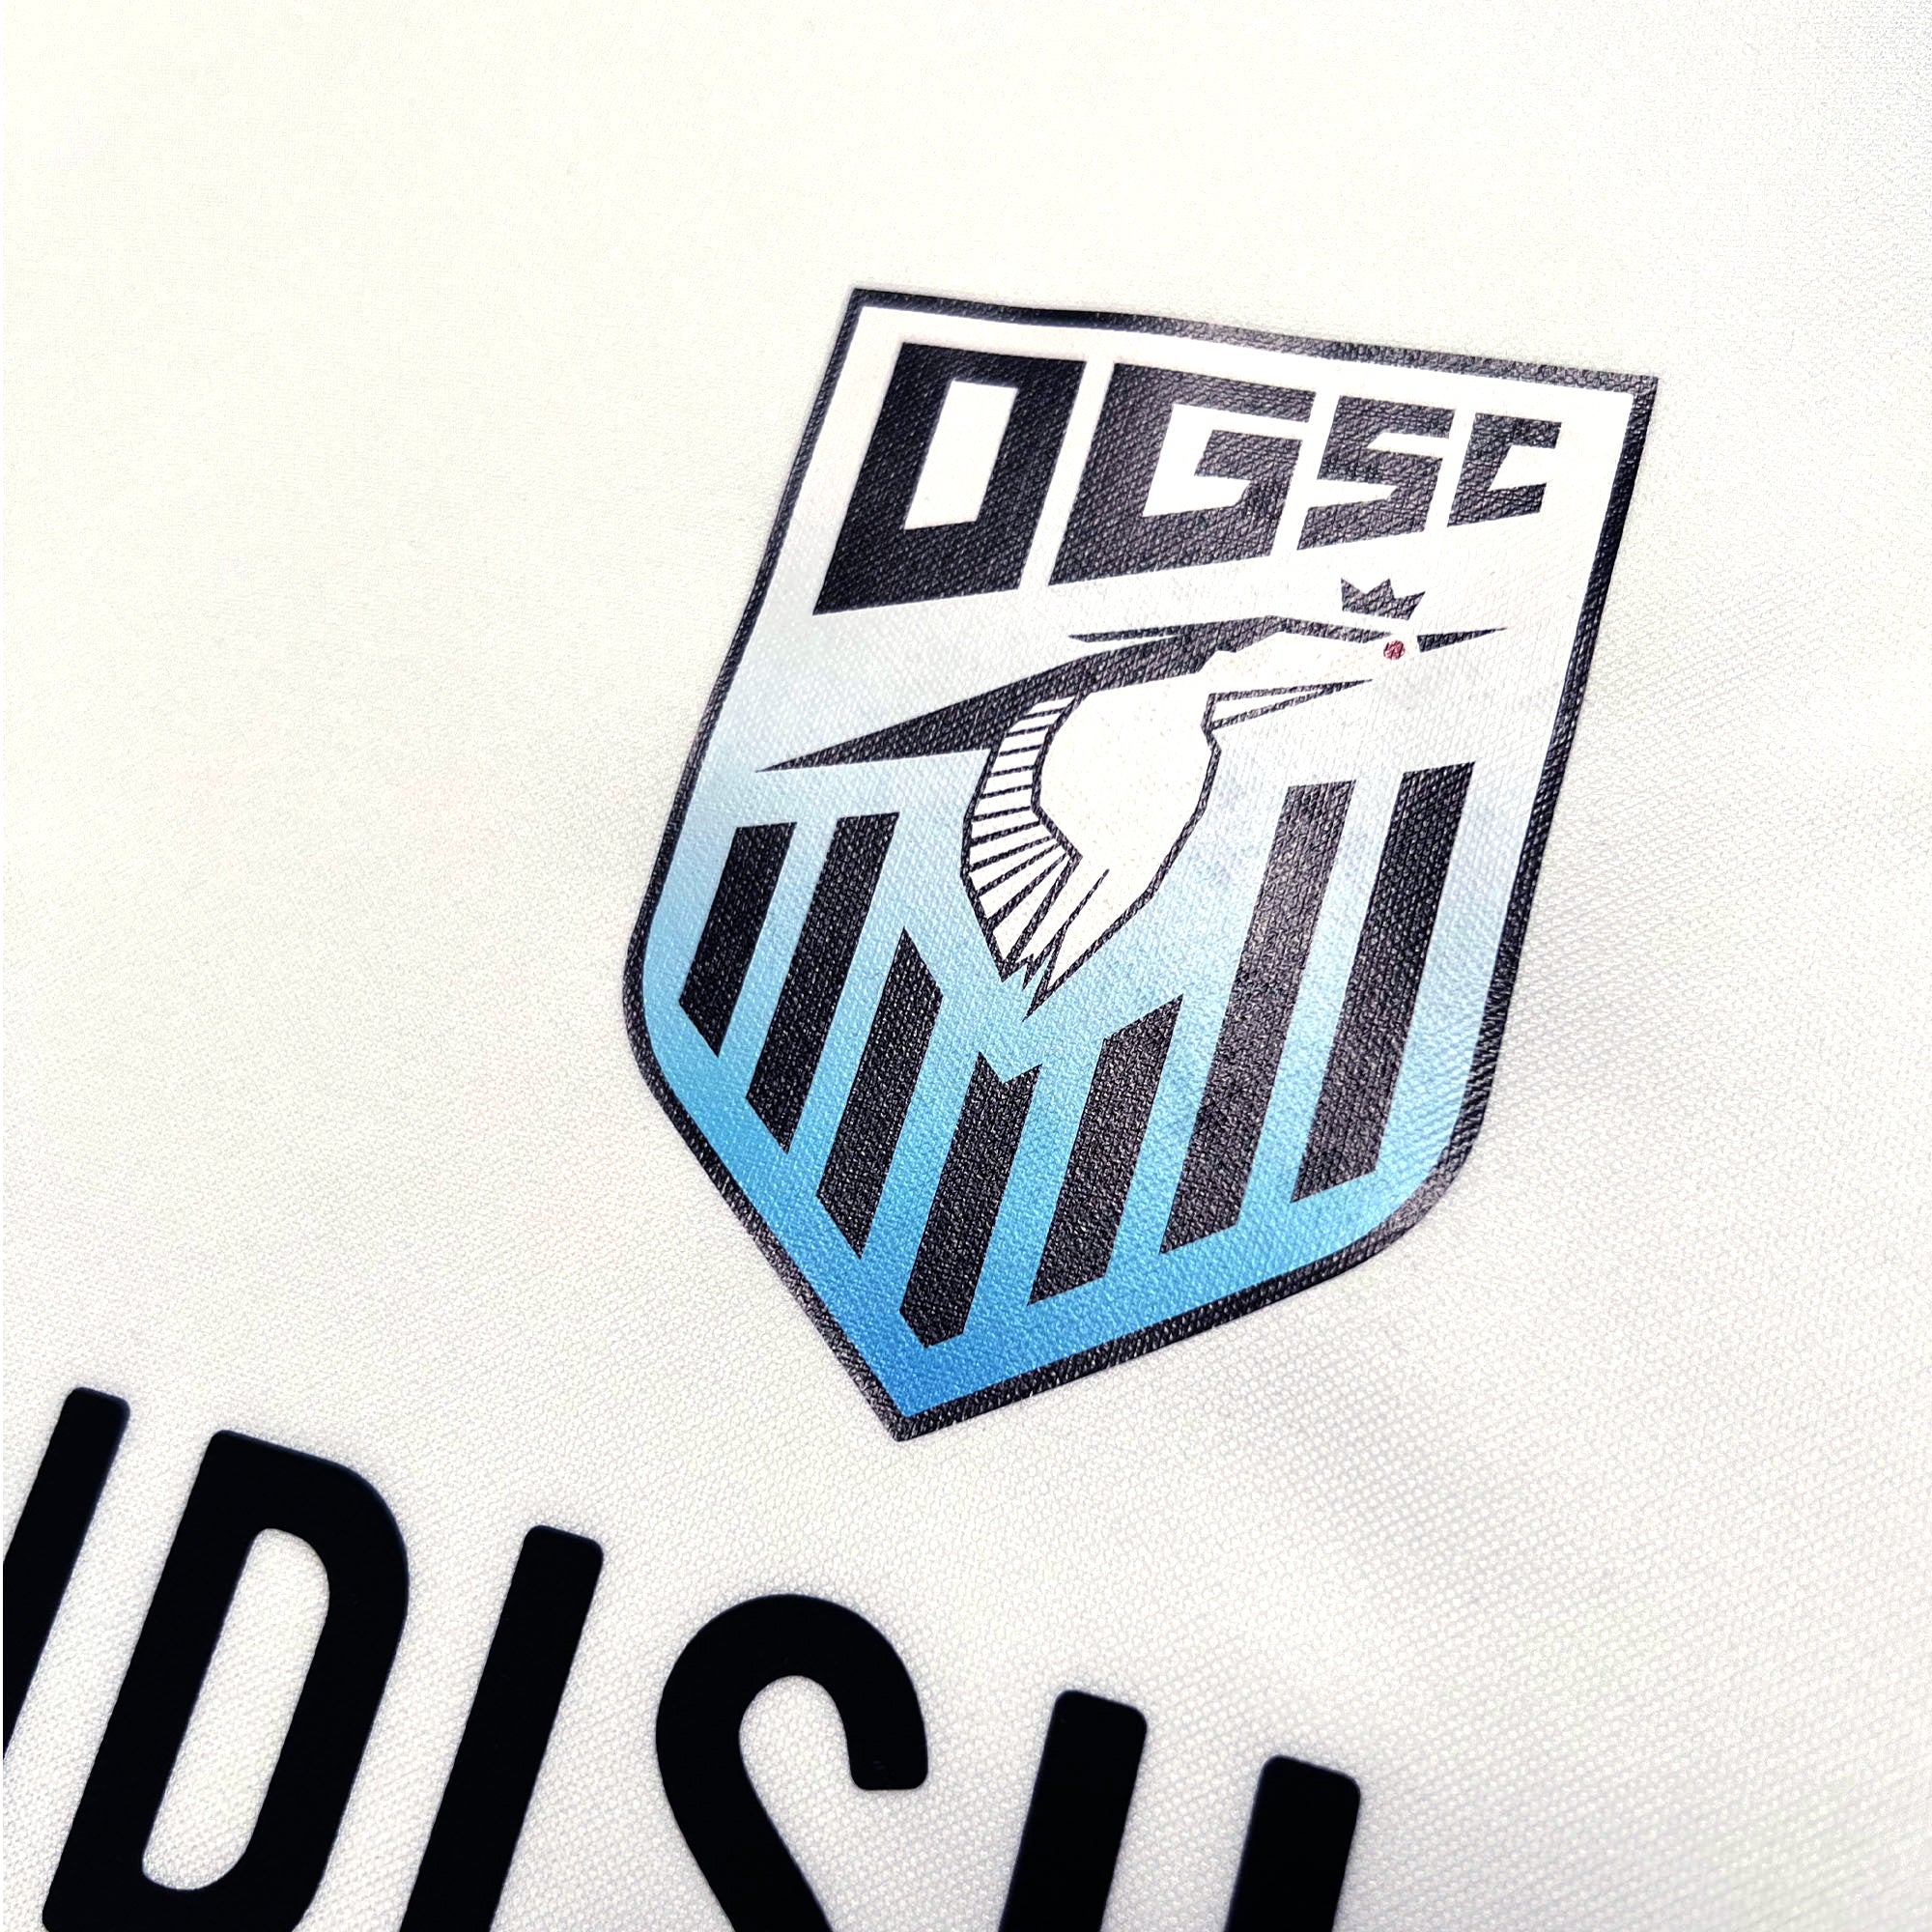 Detailed close-up of Oakland Genesis heron logo on a white soccer jersey. 